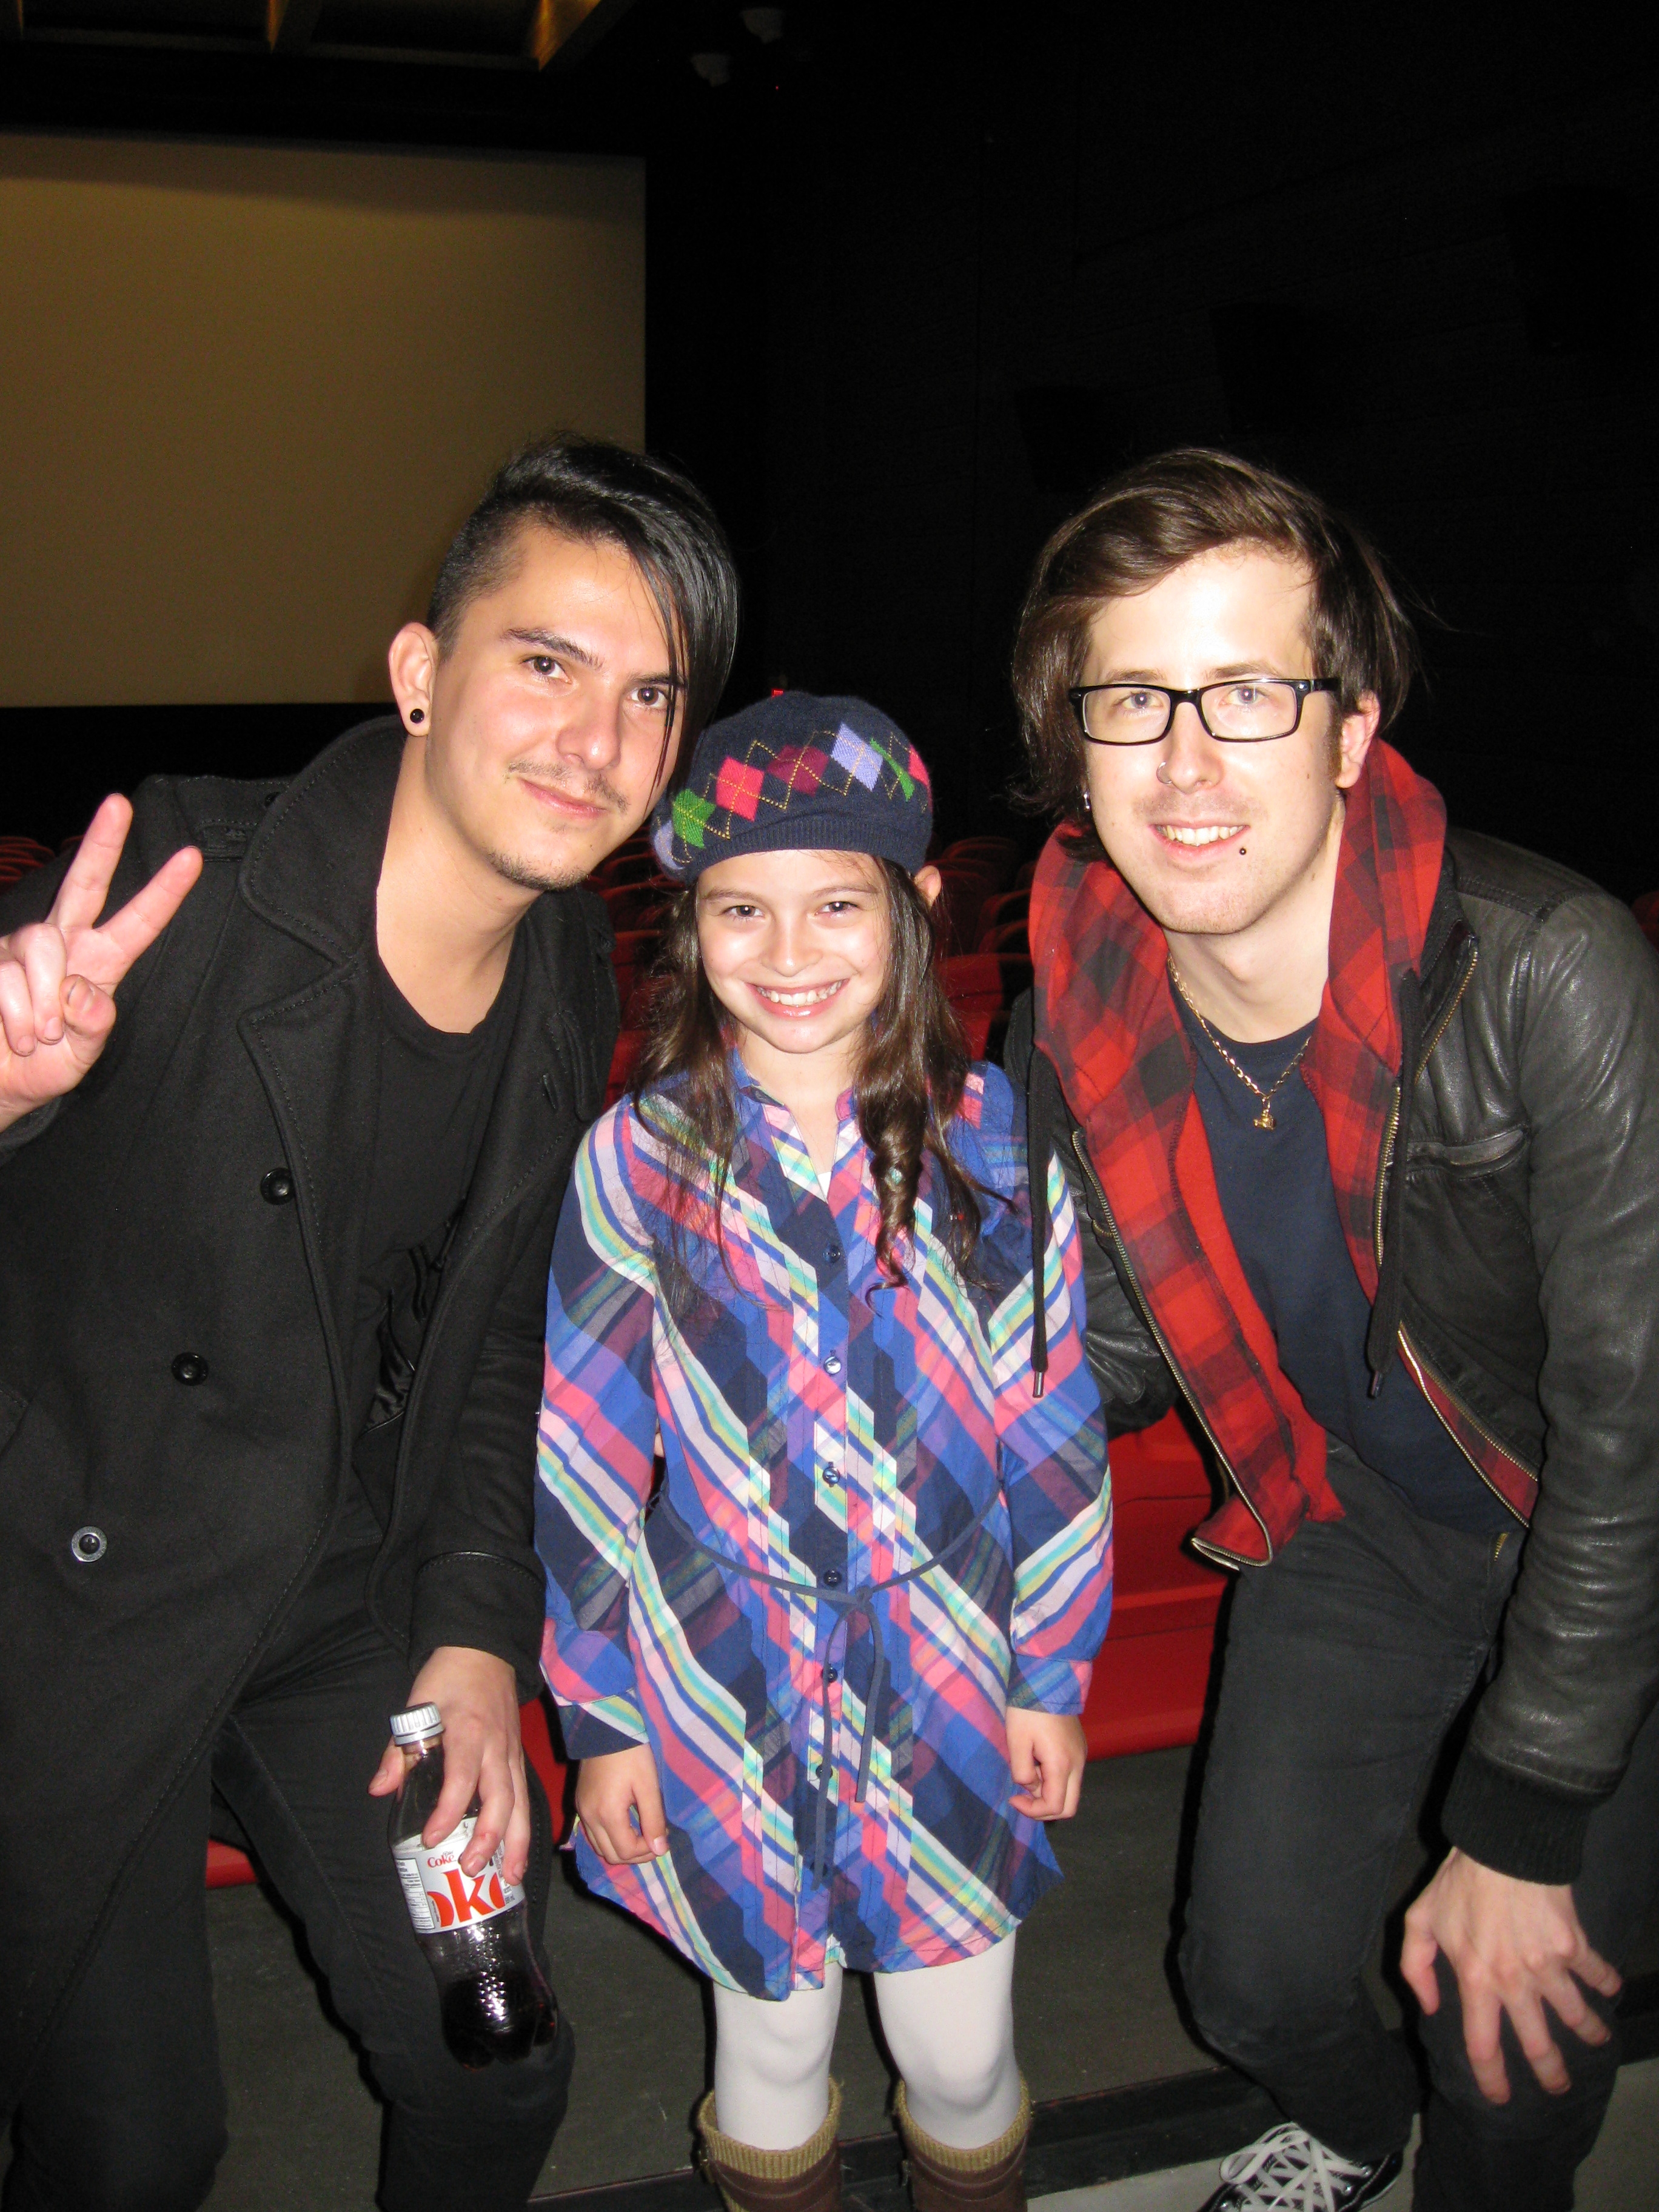 Dalila Bela & The Vicious Brothers on the Screening of 